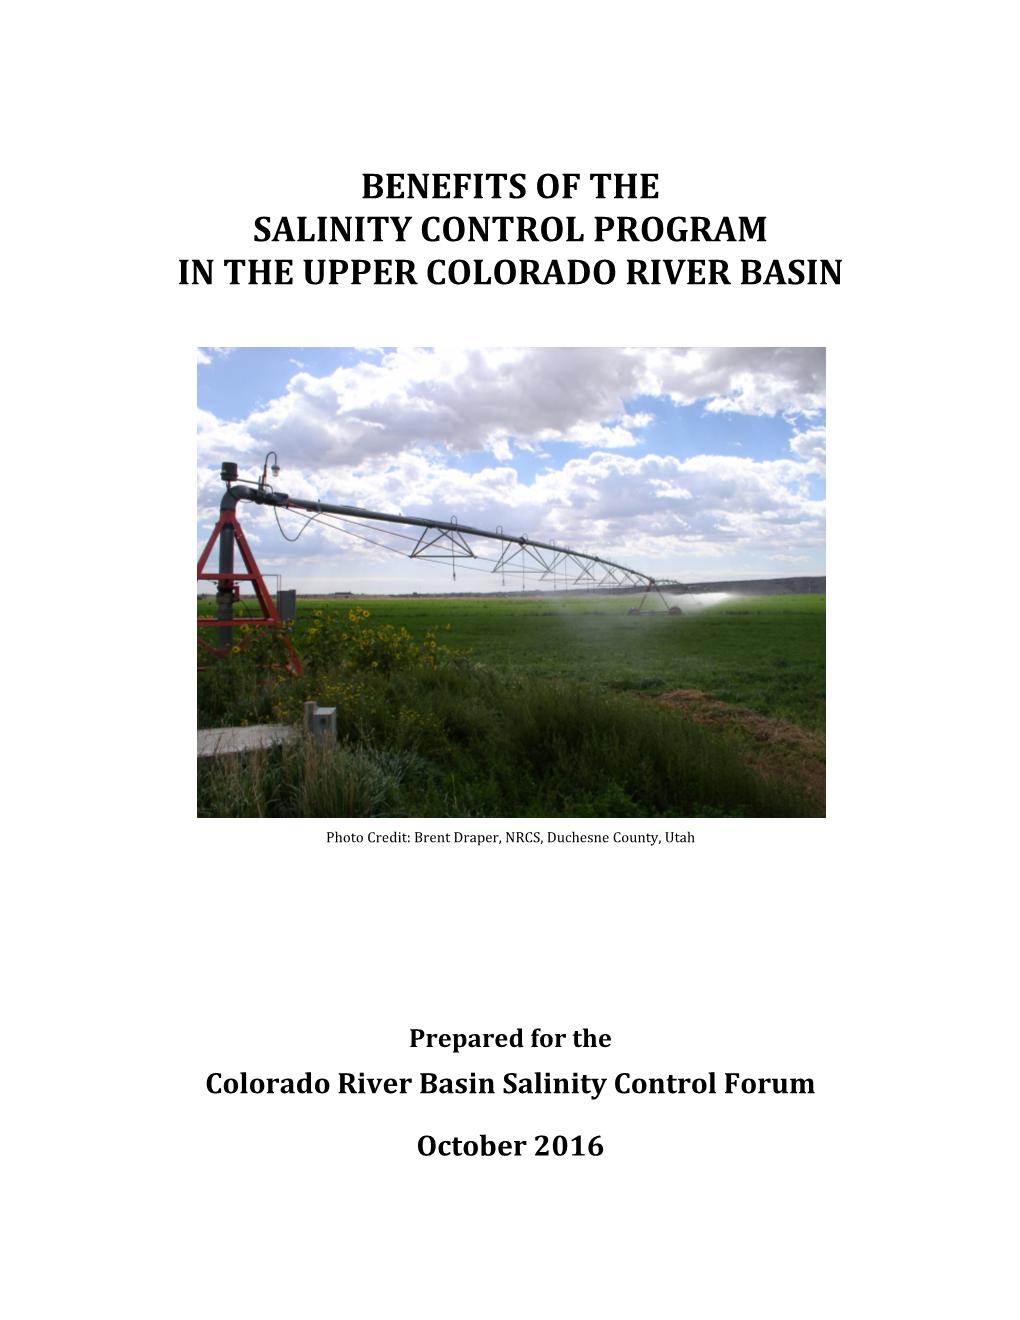 Benefits of the Salinity Control Program in the Upper Colorado River Basin